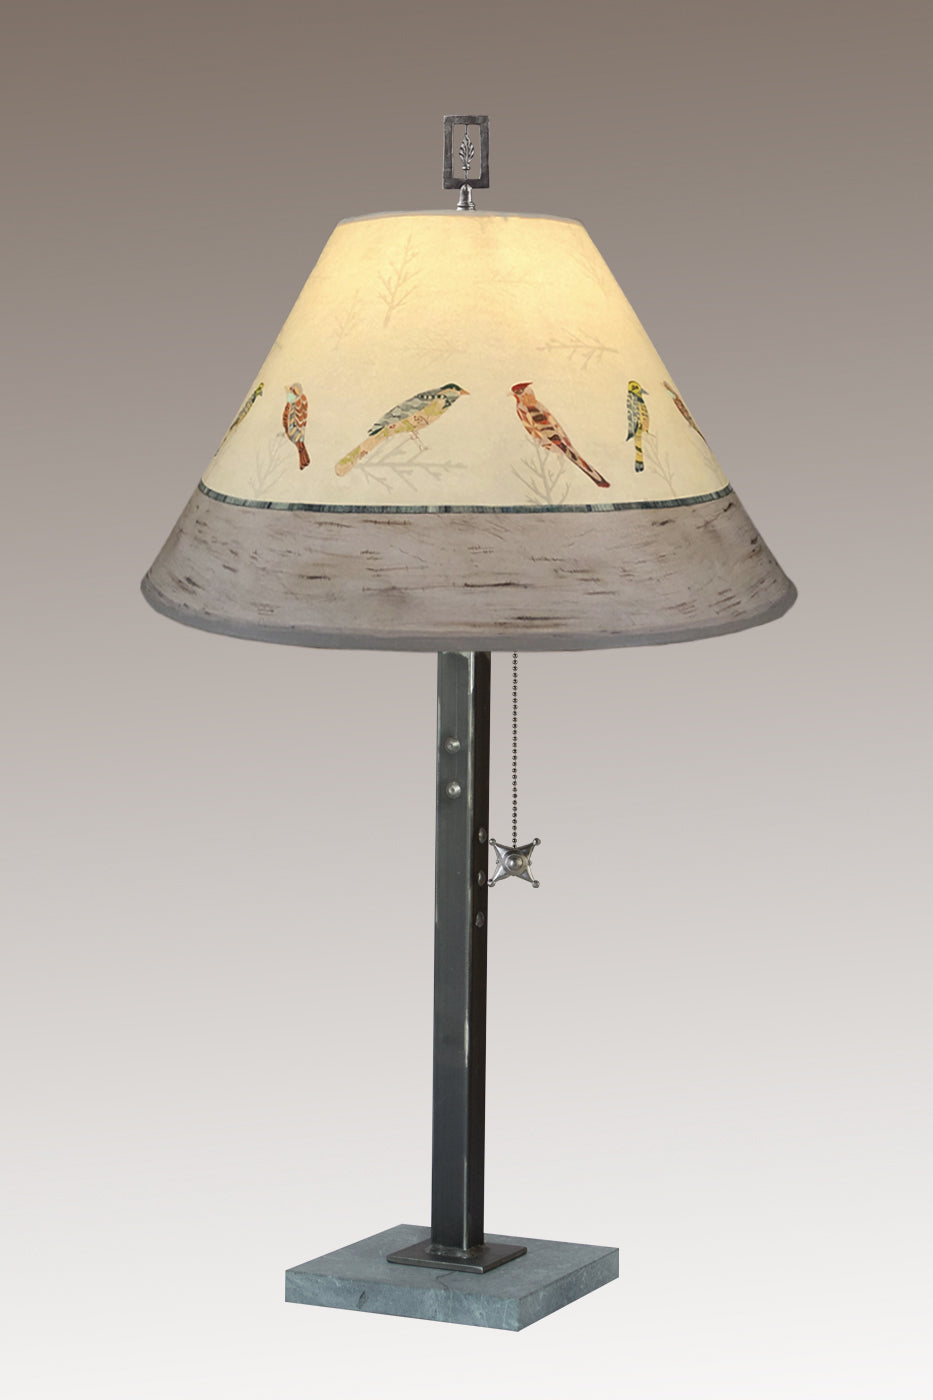 Janna Ugone & Co Table Lamps Steel Table Lamp with Medium Conical Shade in Bird Friends